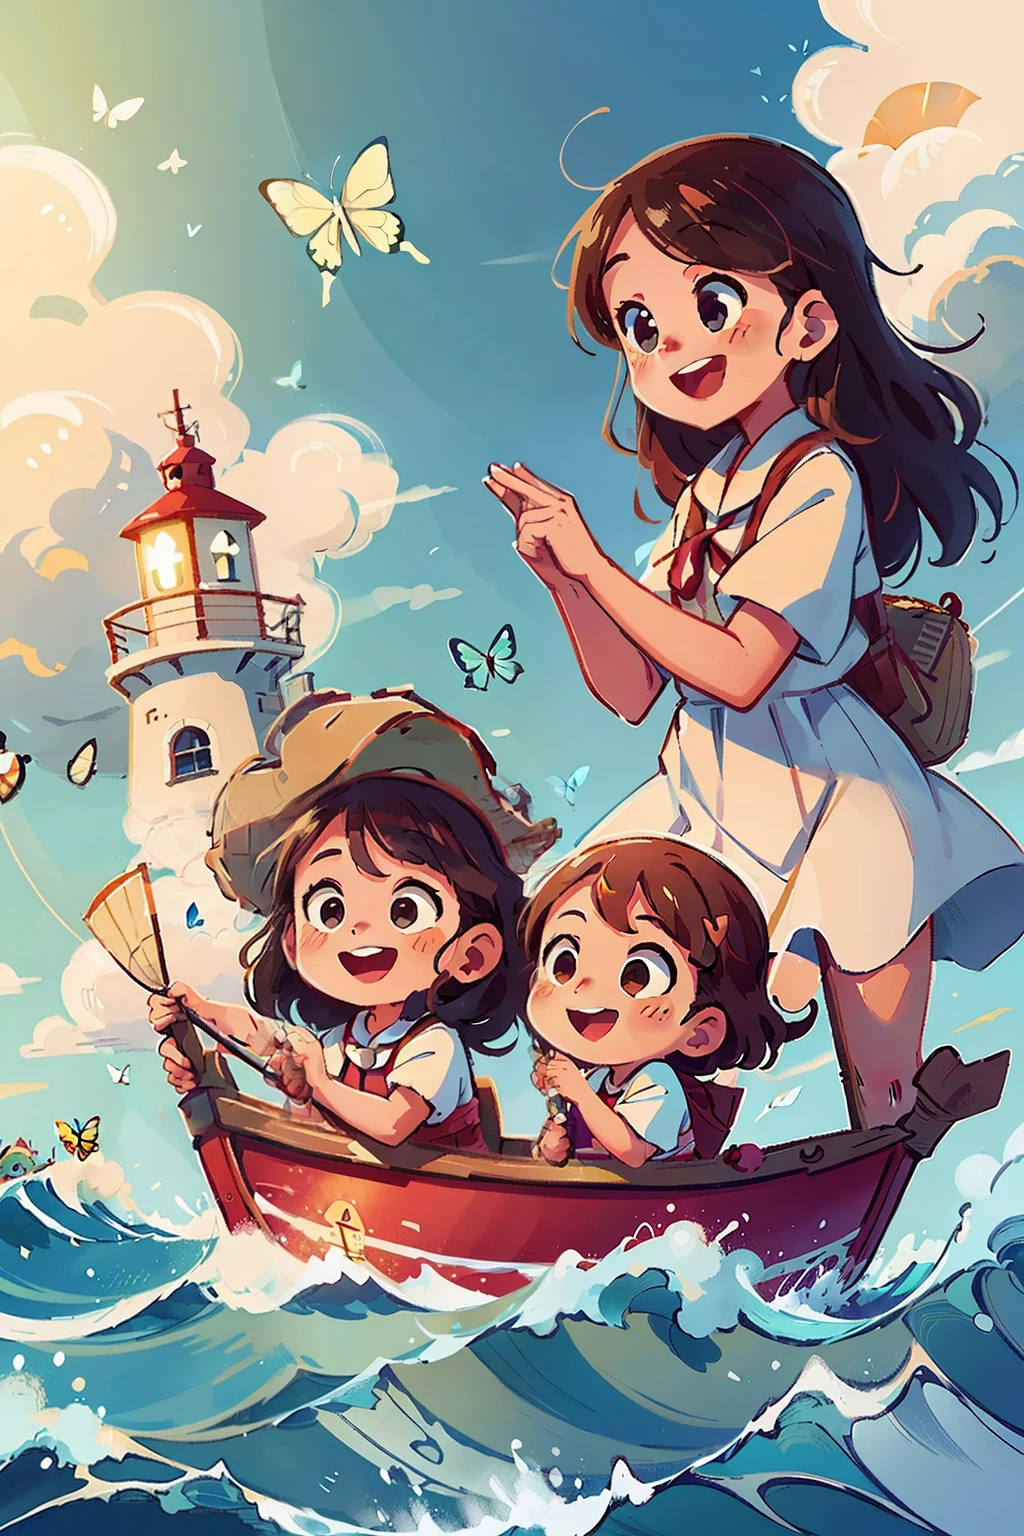 Generates an image of two happy  very young girls sailing on a boat, waves, sea, sky with white clouds. colorful butterflies, lighthouse in the background,